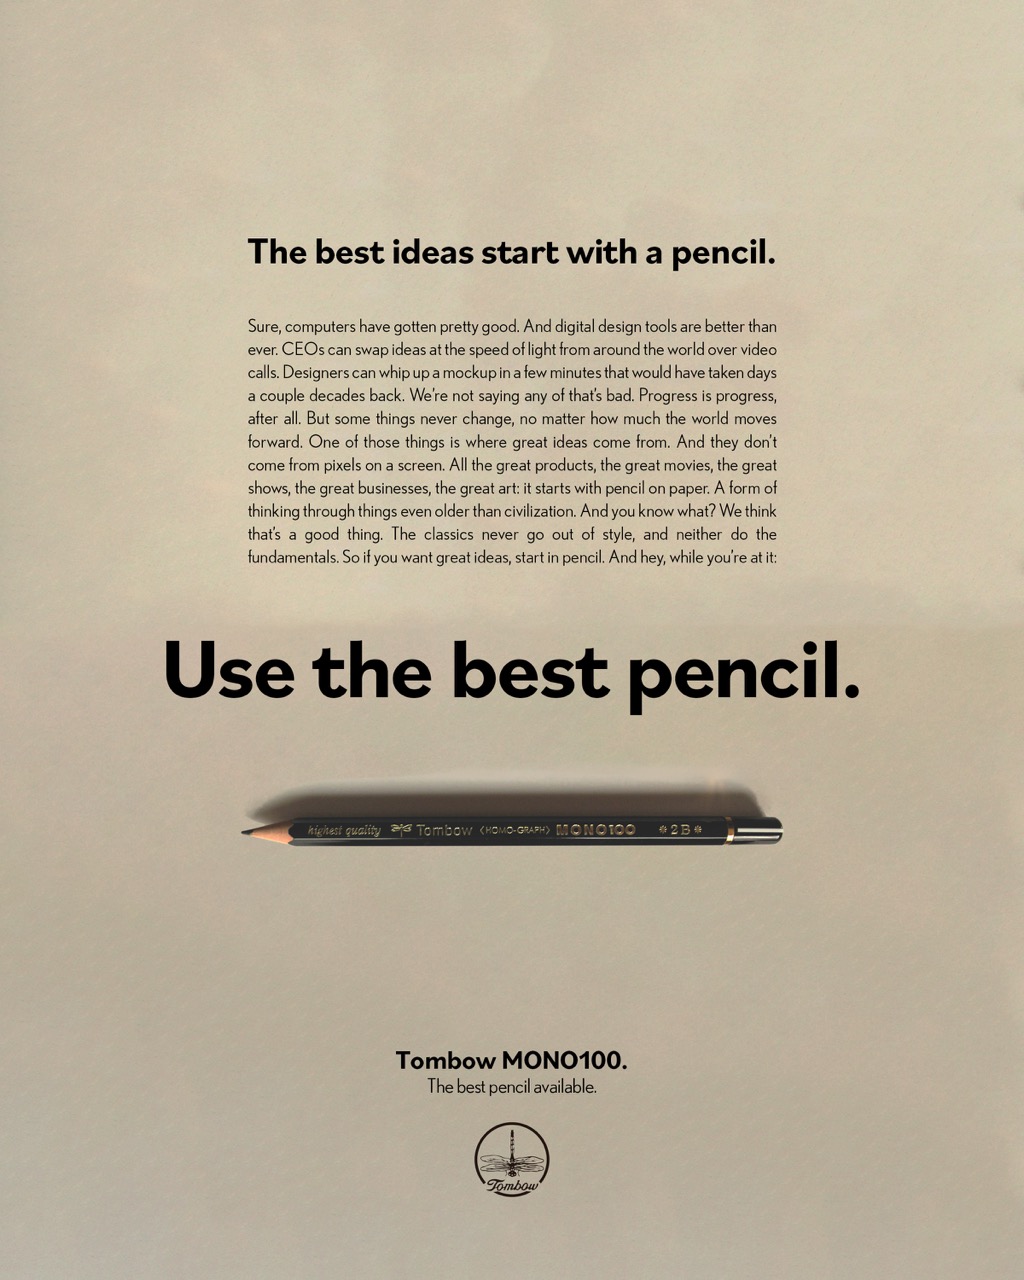 Tombow ad final